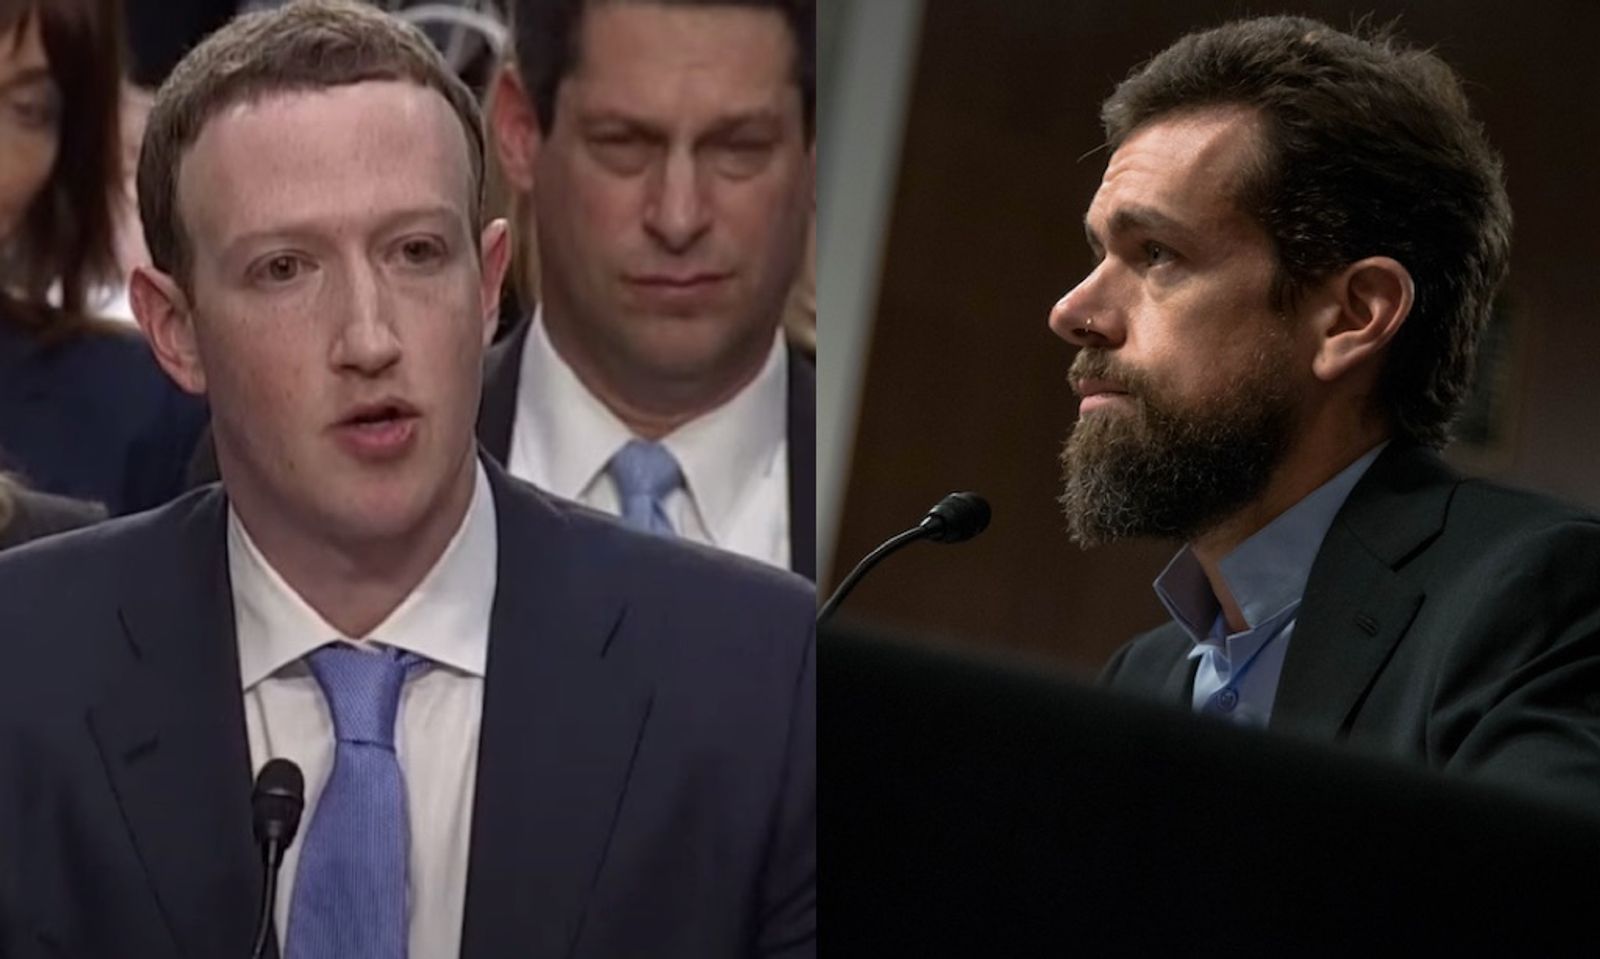 Twitter, Google, Facebook CEOs to Testify on Section 230